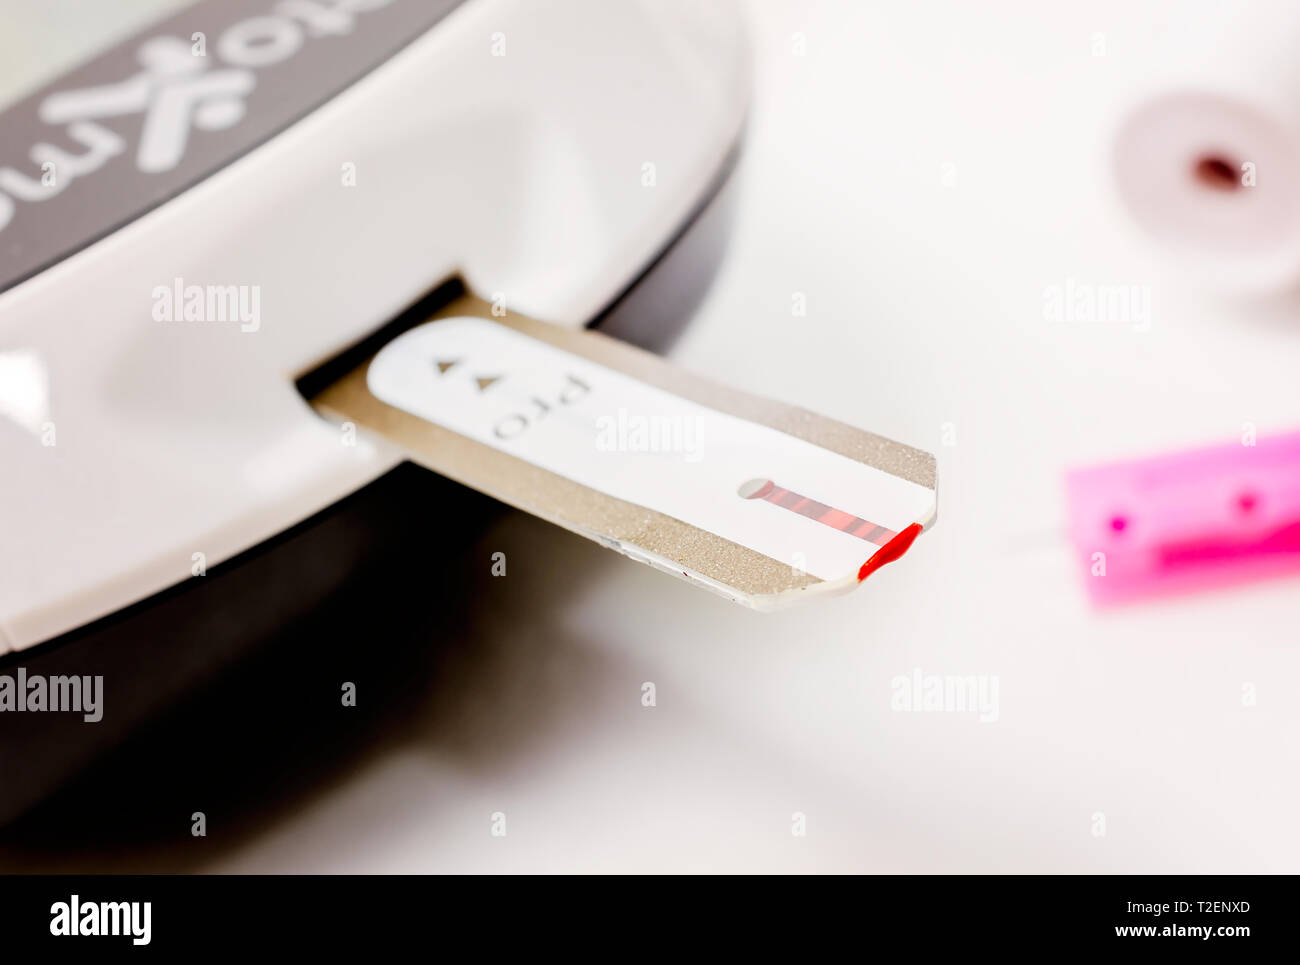 A Keto-Mojo ketone and blood glucose meter is pictured on white, along with a blood glucose test strip, March 30, 2019, in Coden, Alabama. Stock Photo